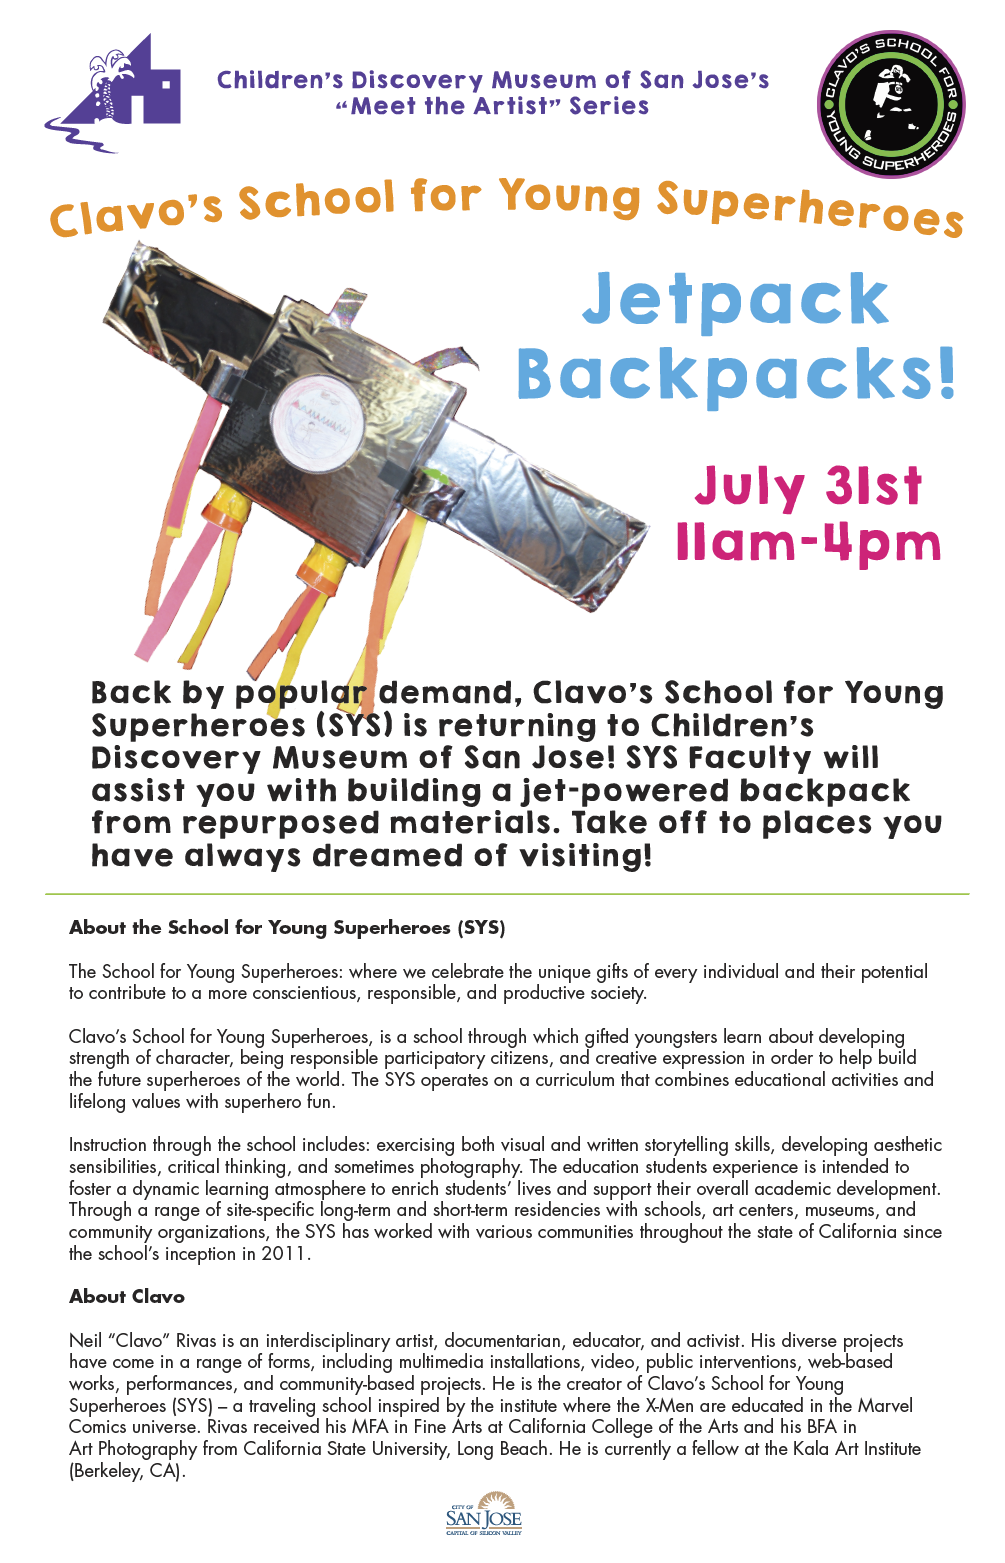 Meet the Artist: Jetpack Backpacks with Clavo's School for Young ...